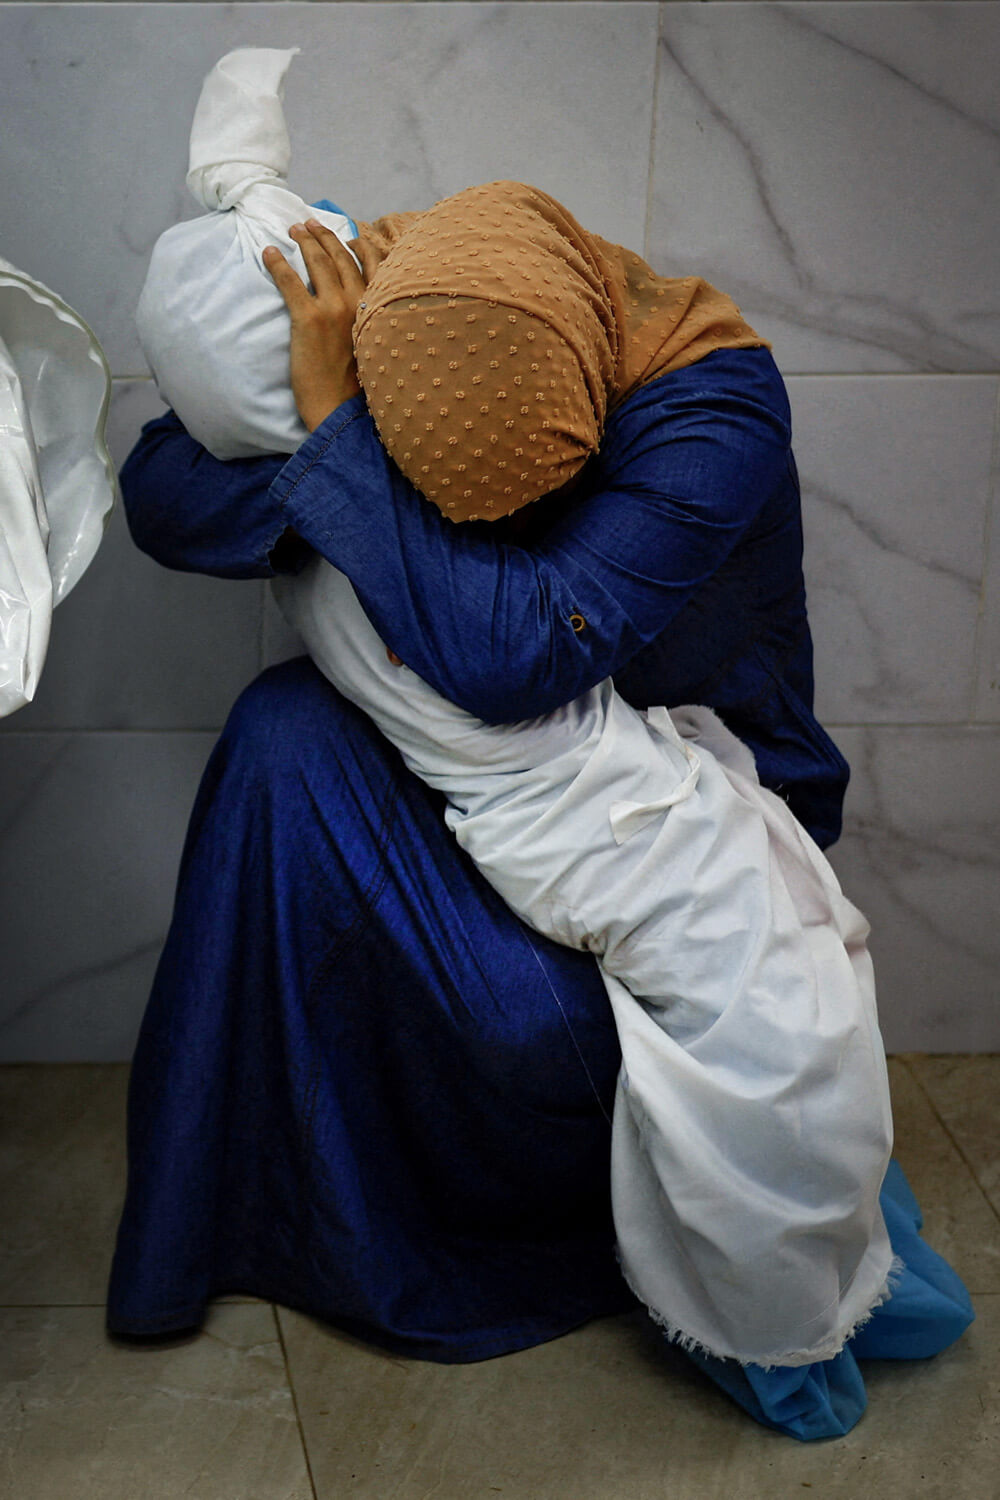 A person in a headscarf and blue garment crouches, covering their head in a posture of despair, while clutching a child's body wrapped in a white sheet